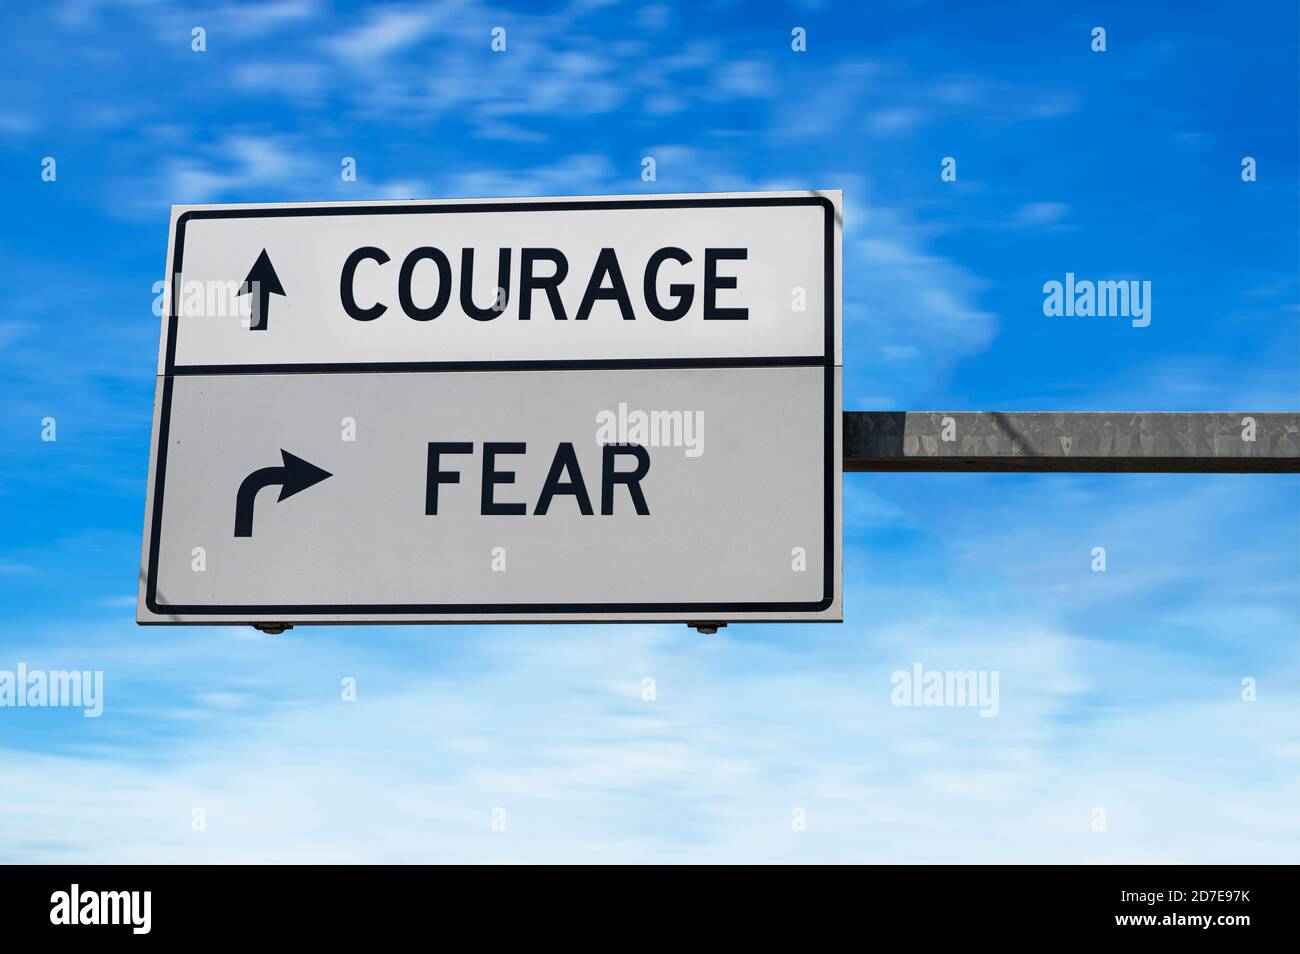 Courage versus fear. White two street signs with arrow on metal pole. Directional road. Crossroads Road Sign, Two Arrow. Blue sky background. Stock Photo